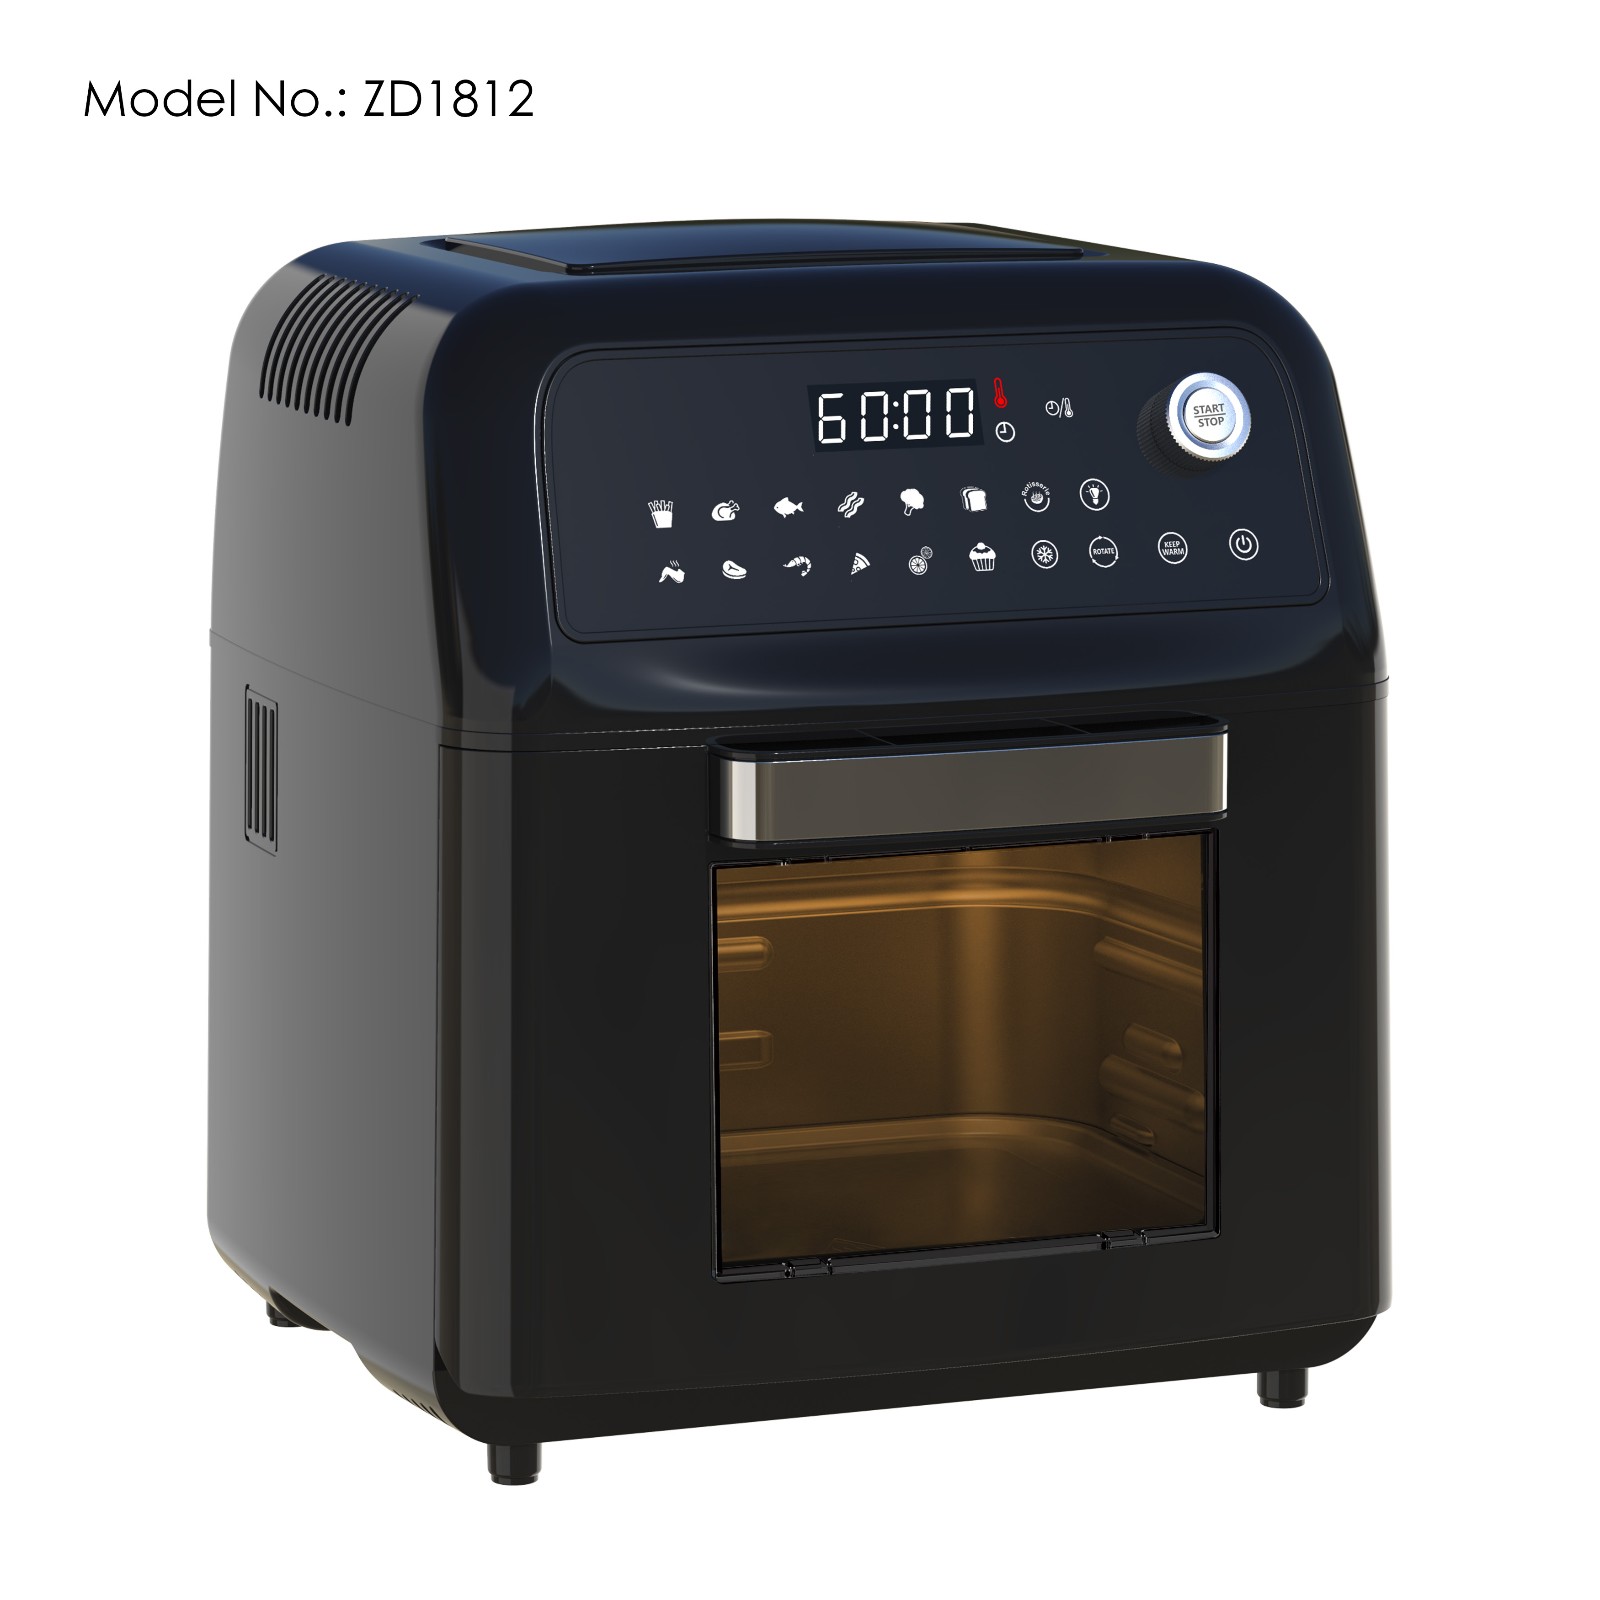 10L Large Capacity Air Fryer Oven with Digital Touch Screen Controls